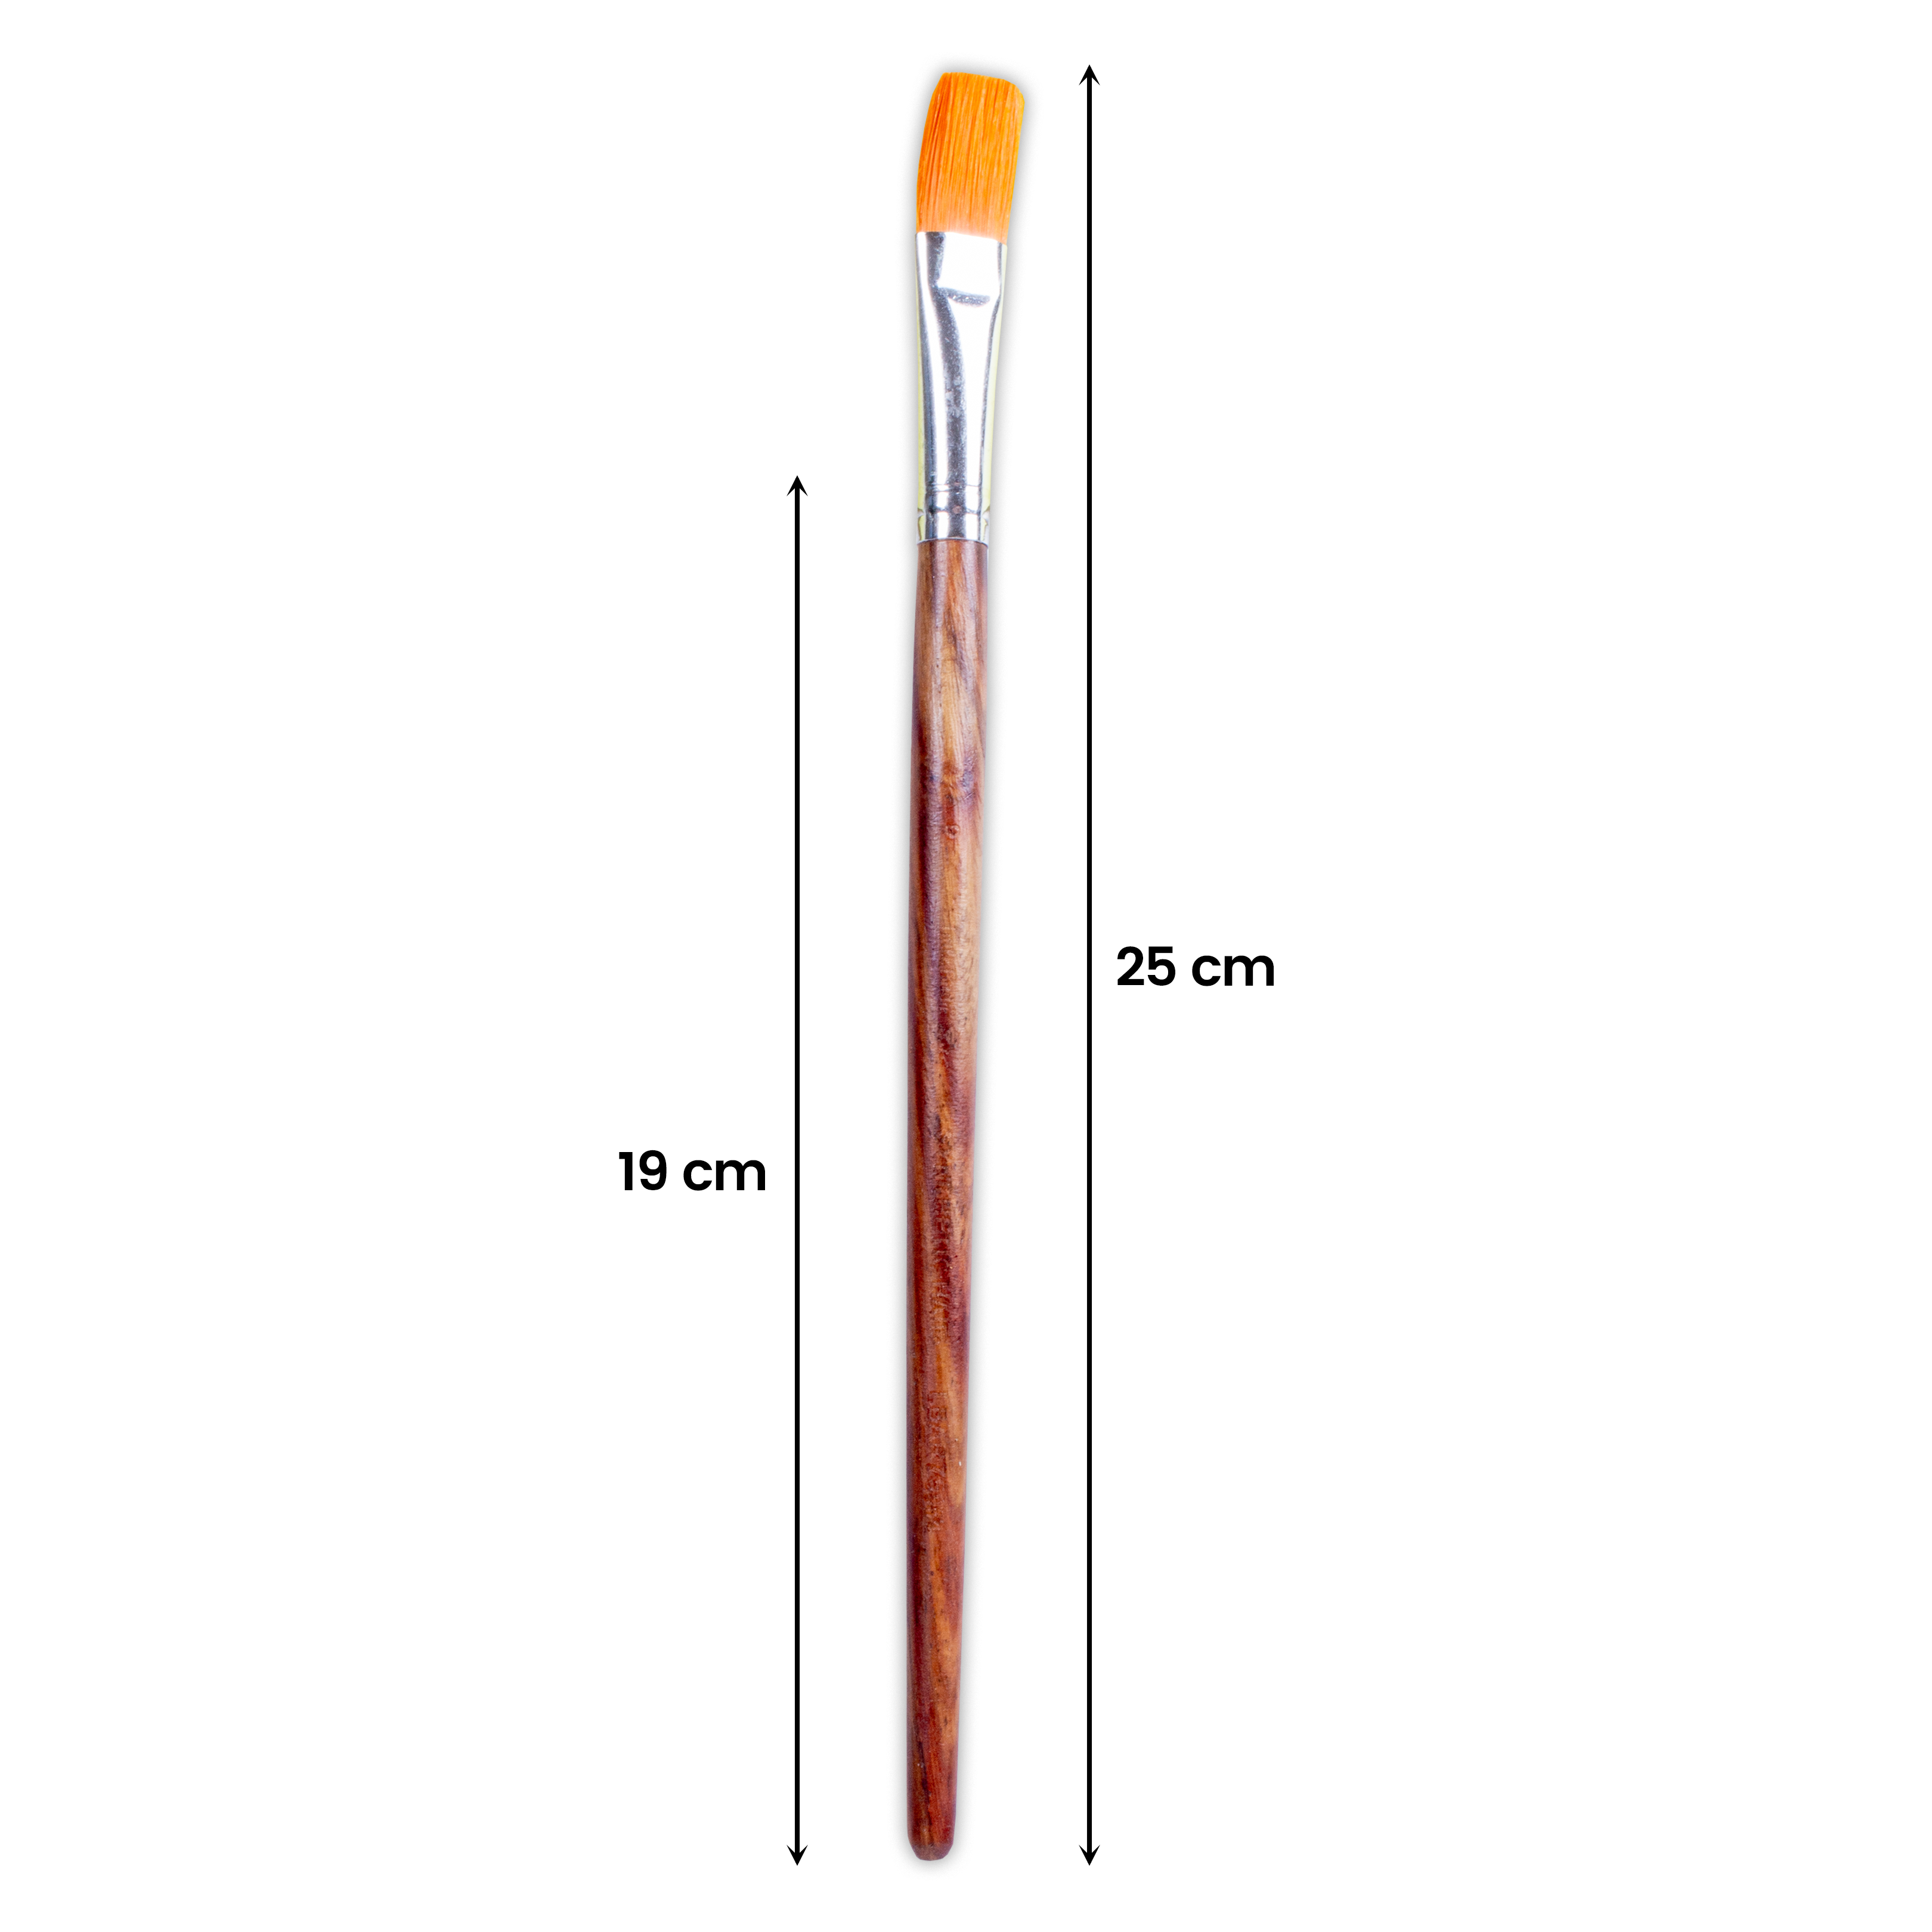 Rosewood Flat Brush Synthetic Hair Handle Length 200mm Size 9 1 pc